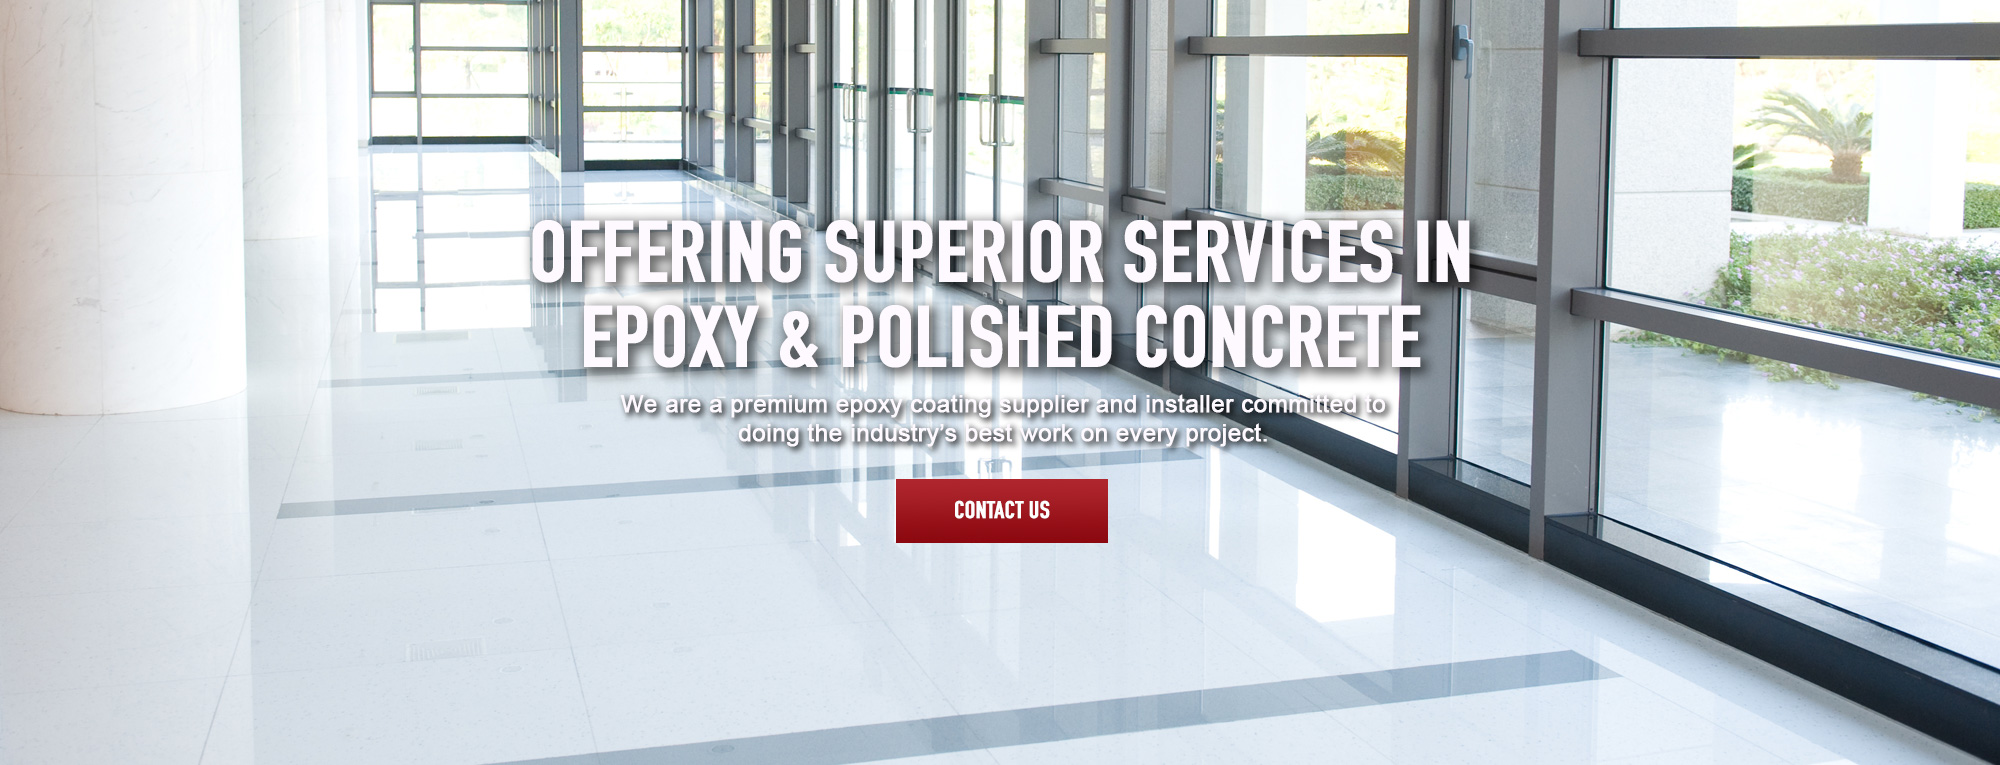 Offering Superior Services in Epoxy & Polished Concrete